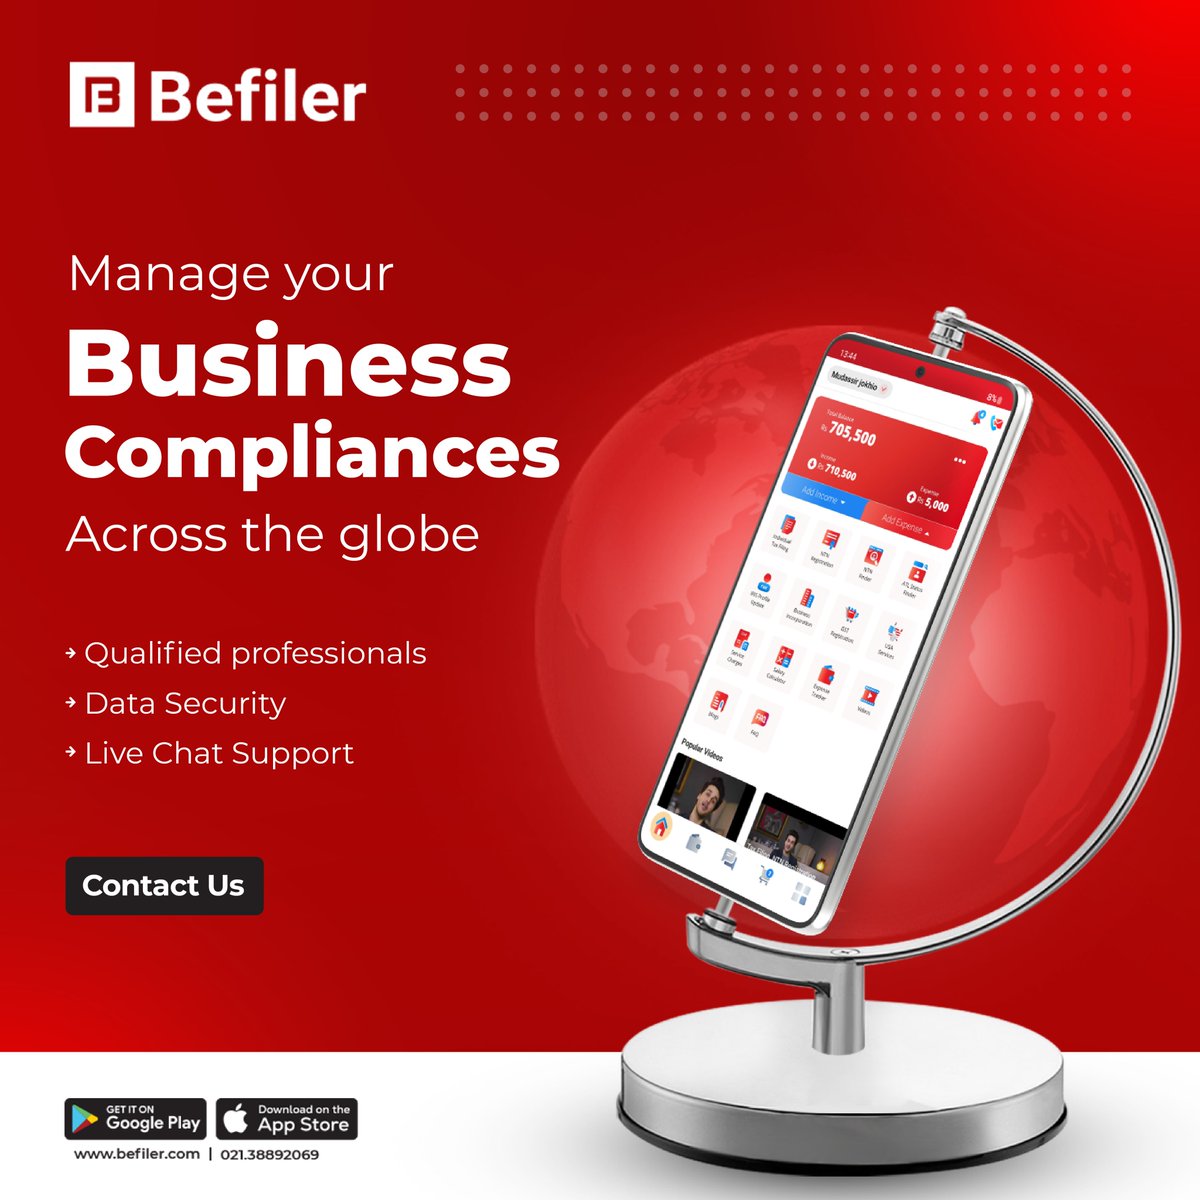 Travelling?
Shopping?
or just relaxing at your home? 🤔

You can now manage your business compliances from anywhere, doing anything! ONLY with Befiler.

#Befiler #BusinesssRegistration #BusinessCompliances #SalesTax #Digital